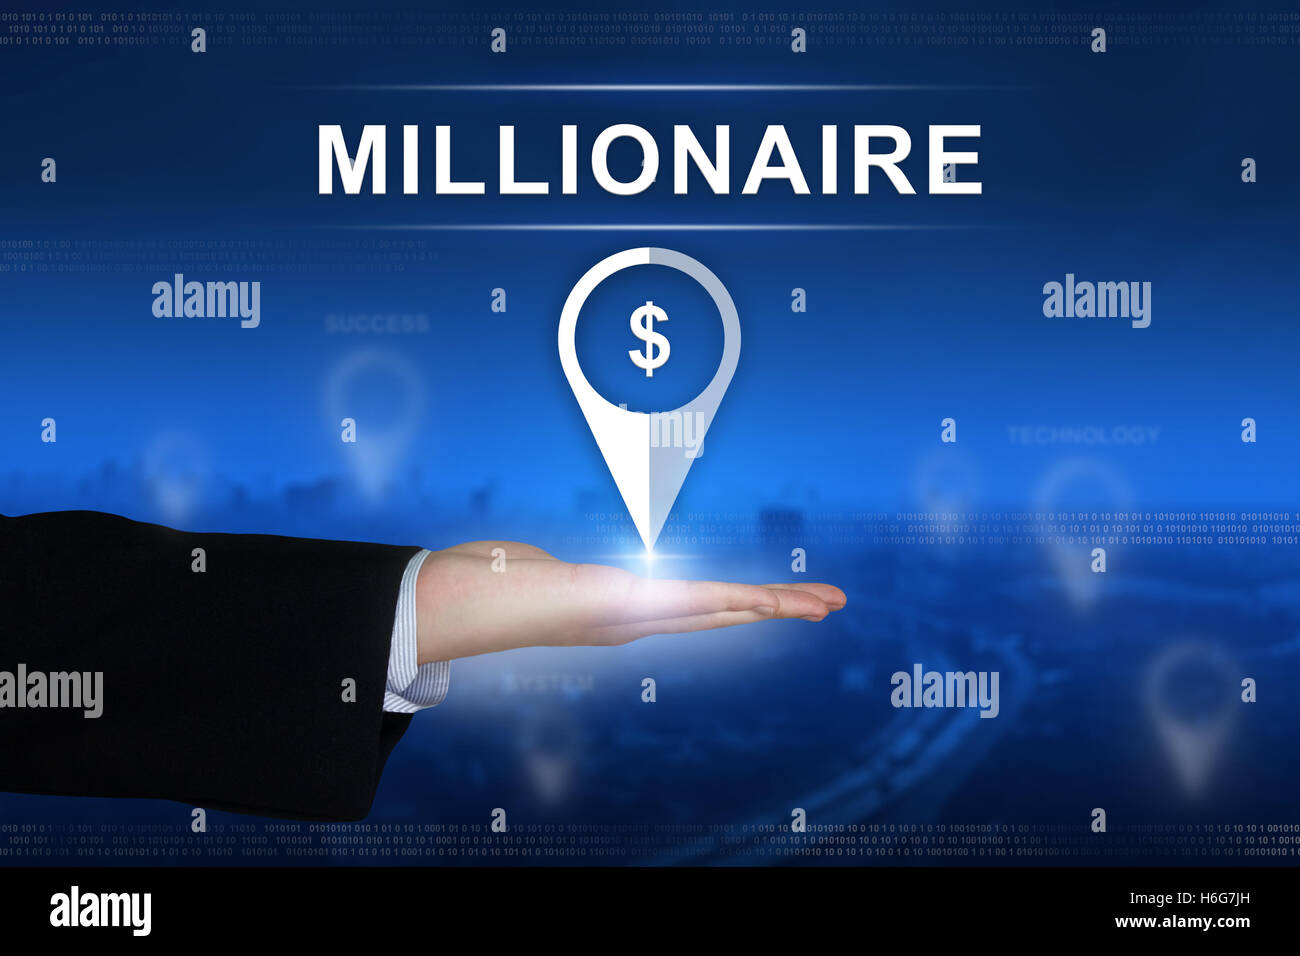 millionaire button with business hand on blurred background Stock Photo